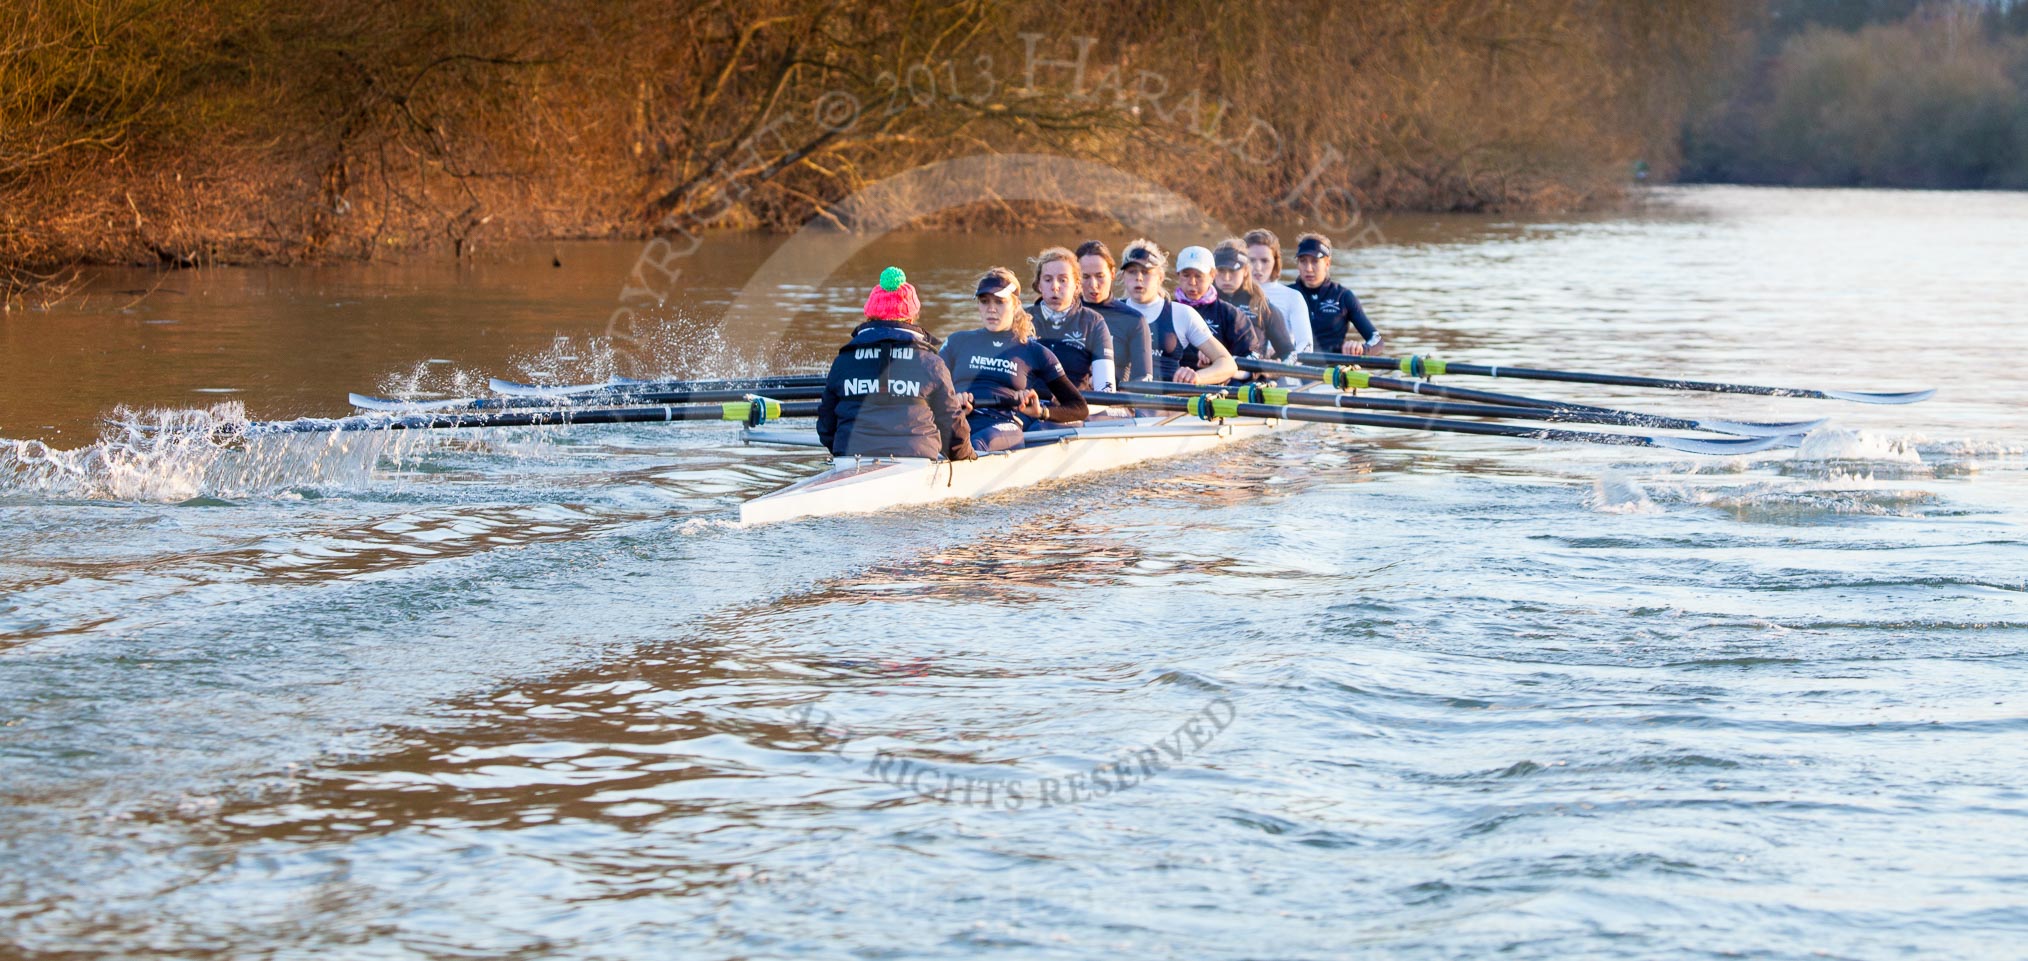 The Boat Race season 2013 - OUWBC training: In the OUWBC Blue Boat cox Katie Apfelbaum, stroke Maxie Scheske, Anastasia Chitty, Harriet Keane, Amy Varney, Jo Lee, Mary Foord-Weston, Alice Carrington-Windo, and bow Mariann Novak..
River Thames,
Wallingford,
Oxfordshire,
United Kingdom,
on 13 March 2013 at 17:28, image #144